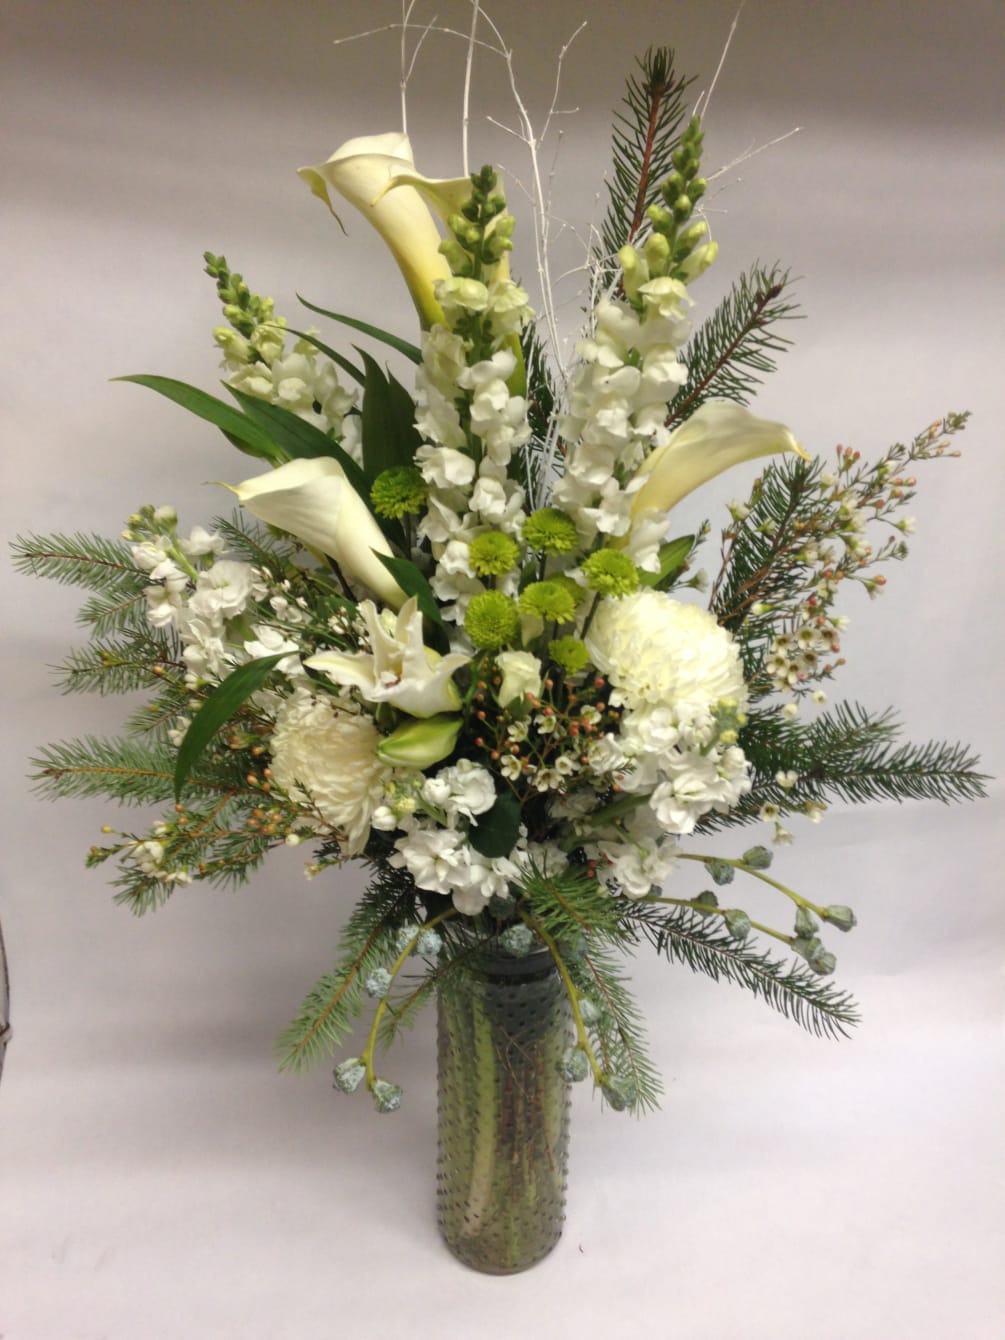 This winter inspired arrangement comes complete with mums, calla lilies, stock, snapdragons